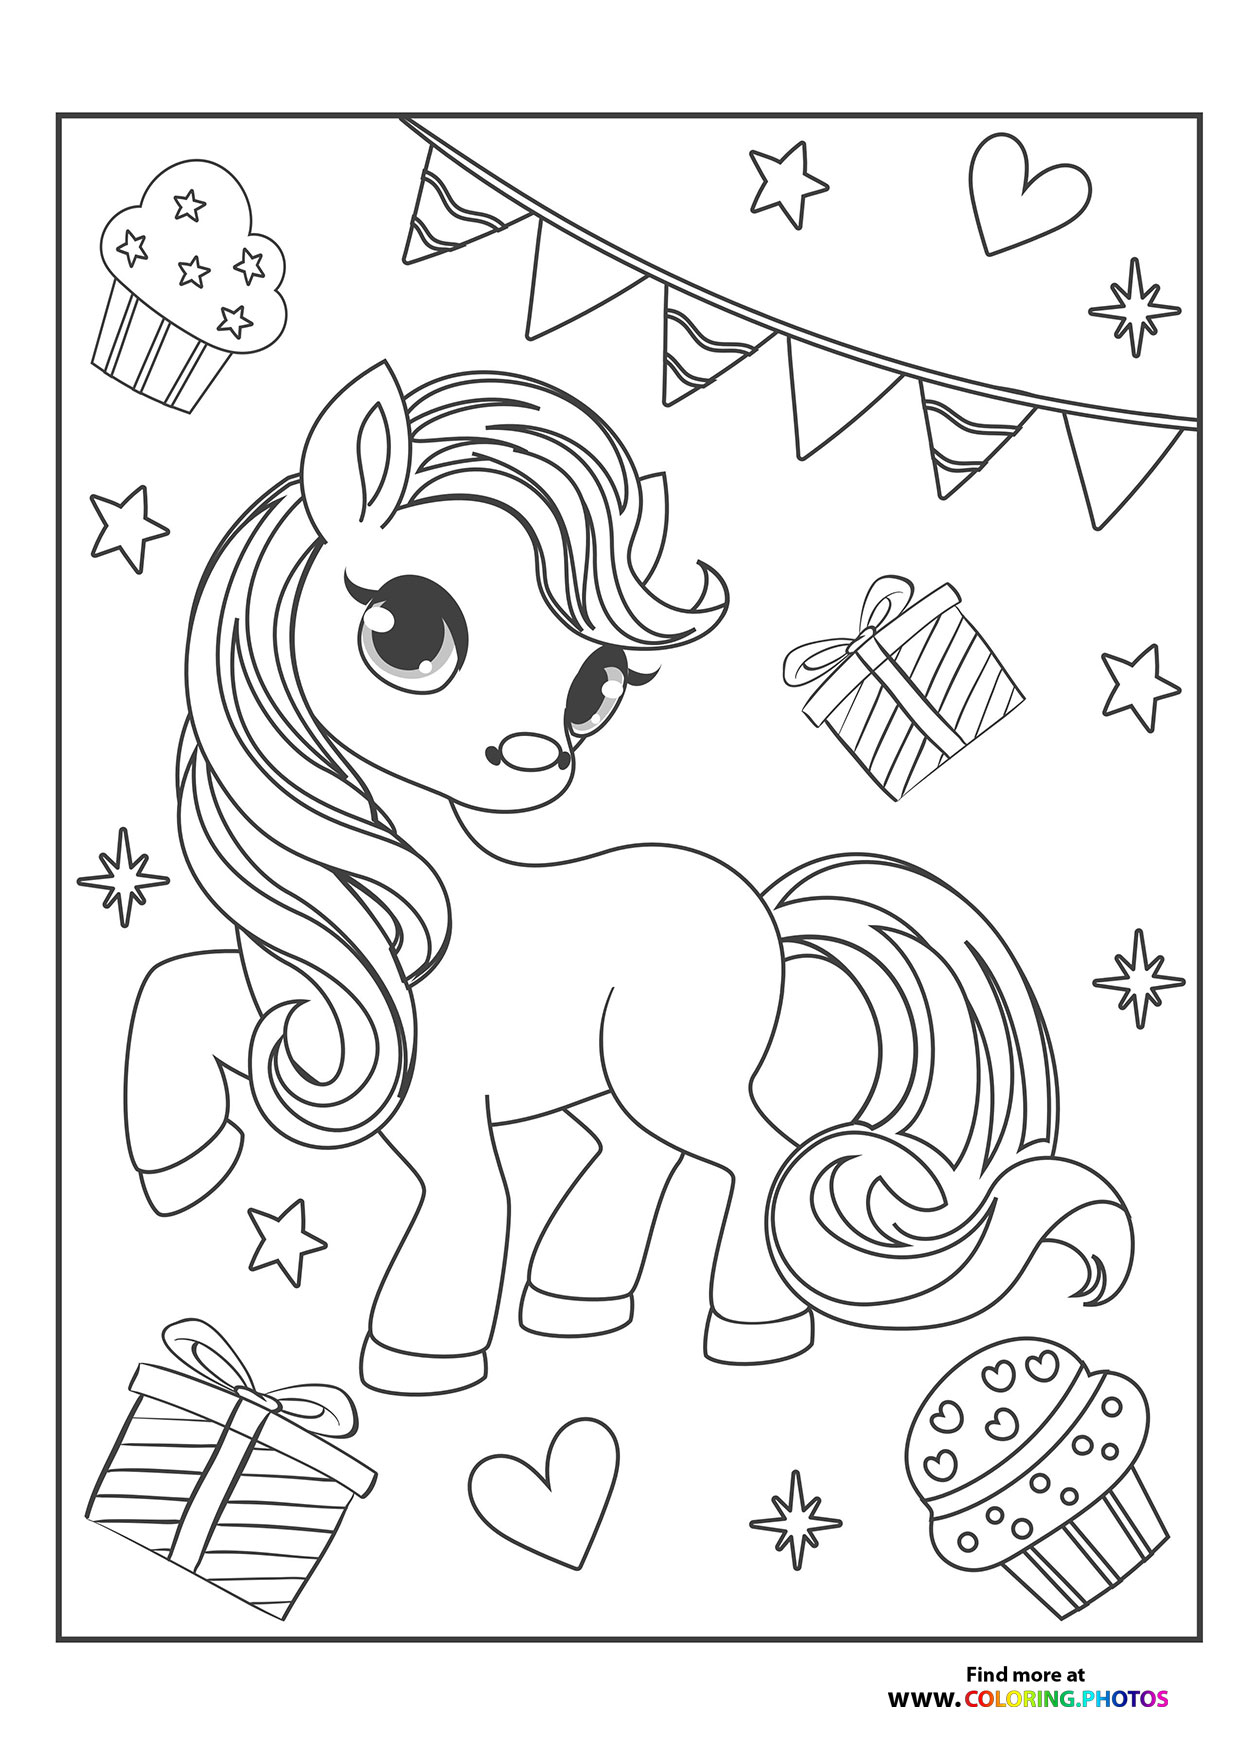 Party pony - Coloring Pages for kids